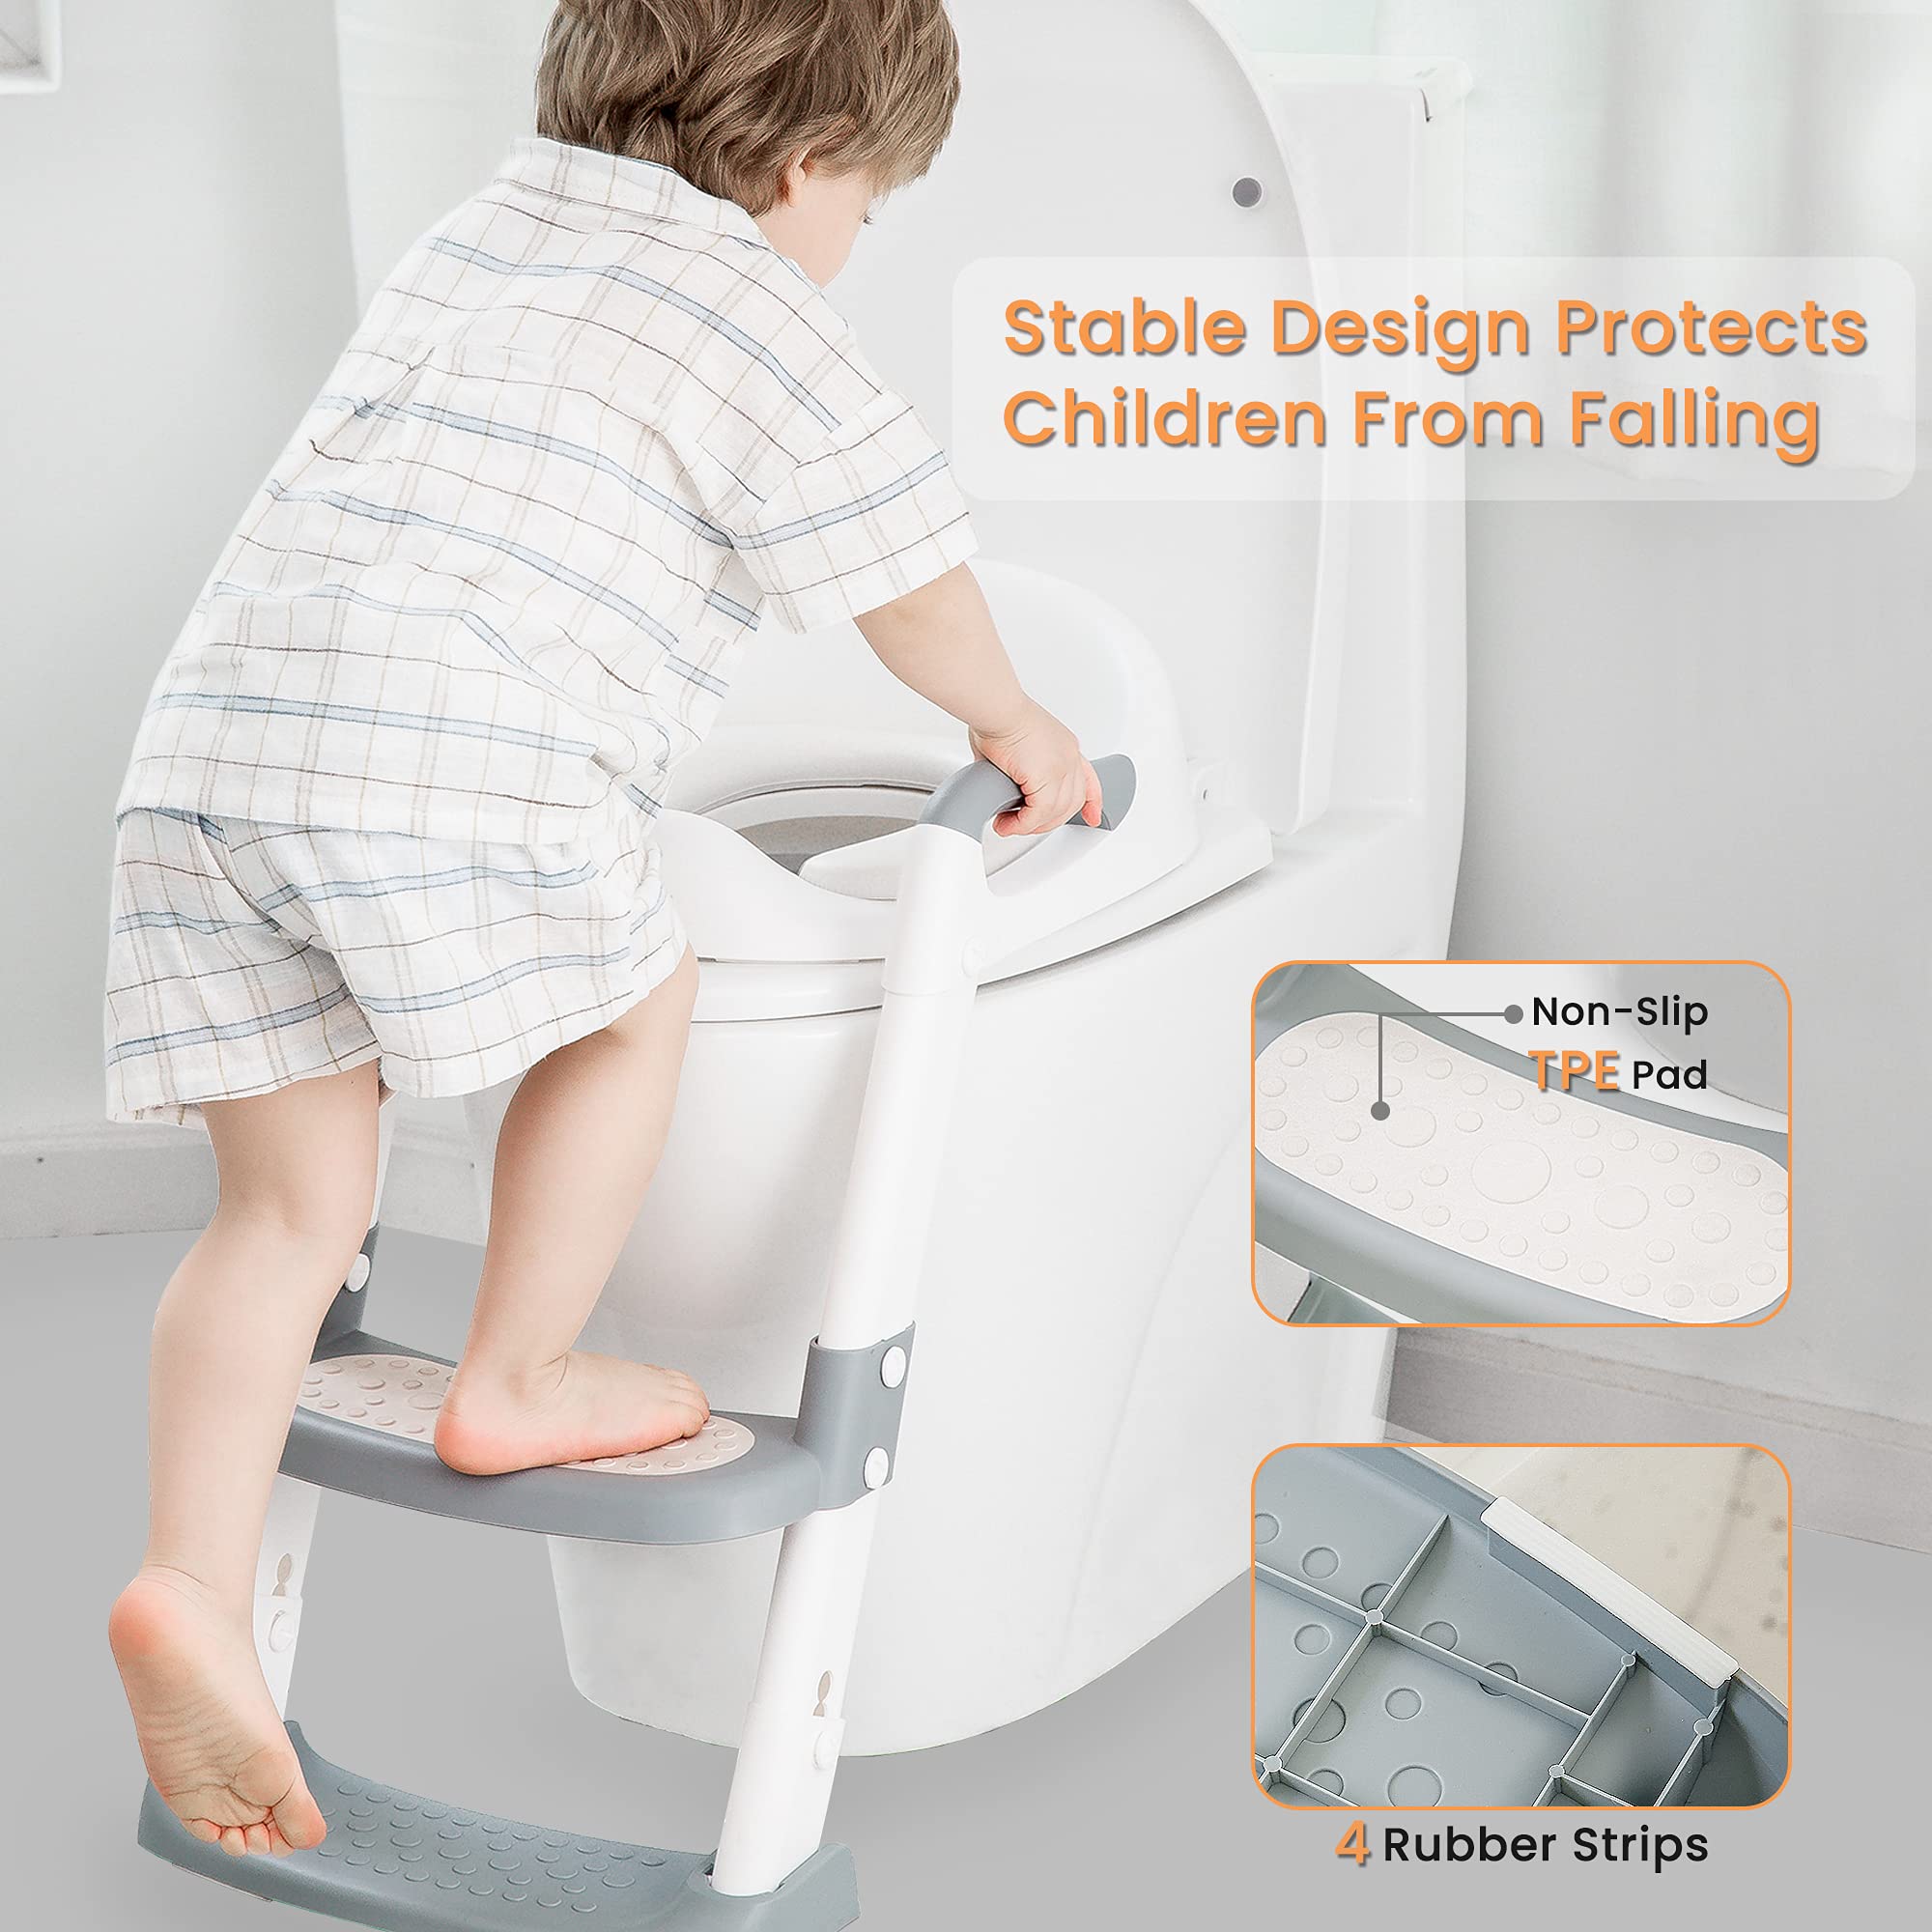 Kids Potty Training Toilet Seat with Step Stool Ladder for Baby